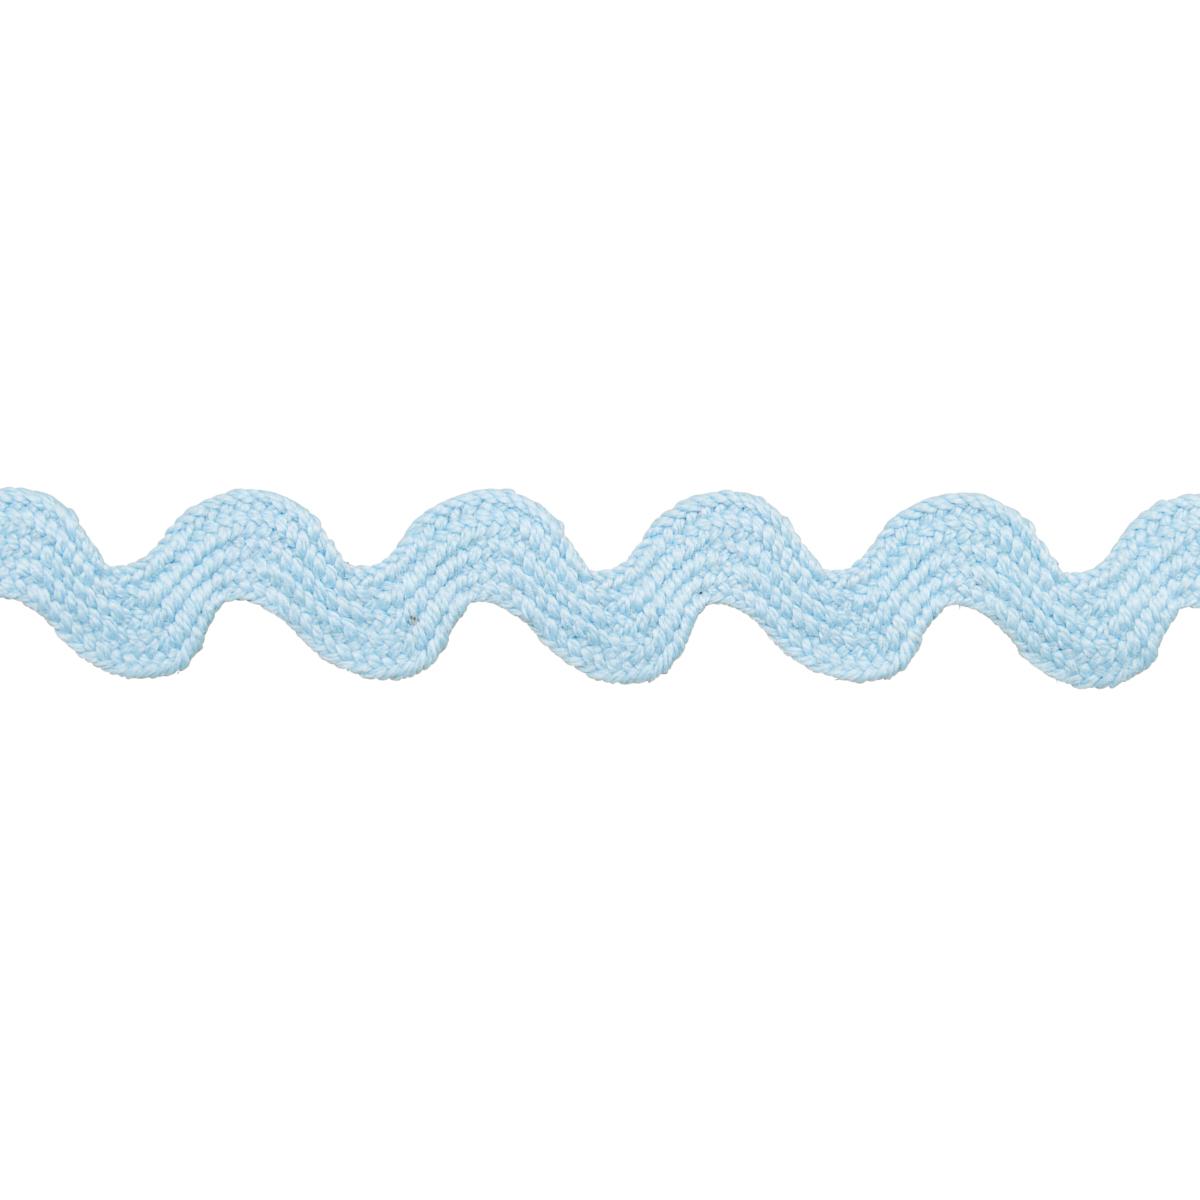 RIC RAC TAPE SMALL_PALE BLUE